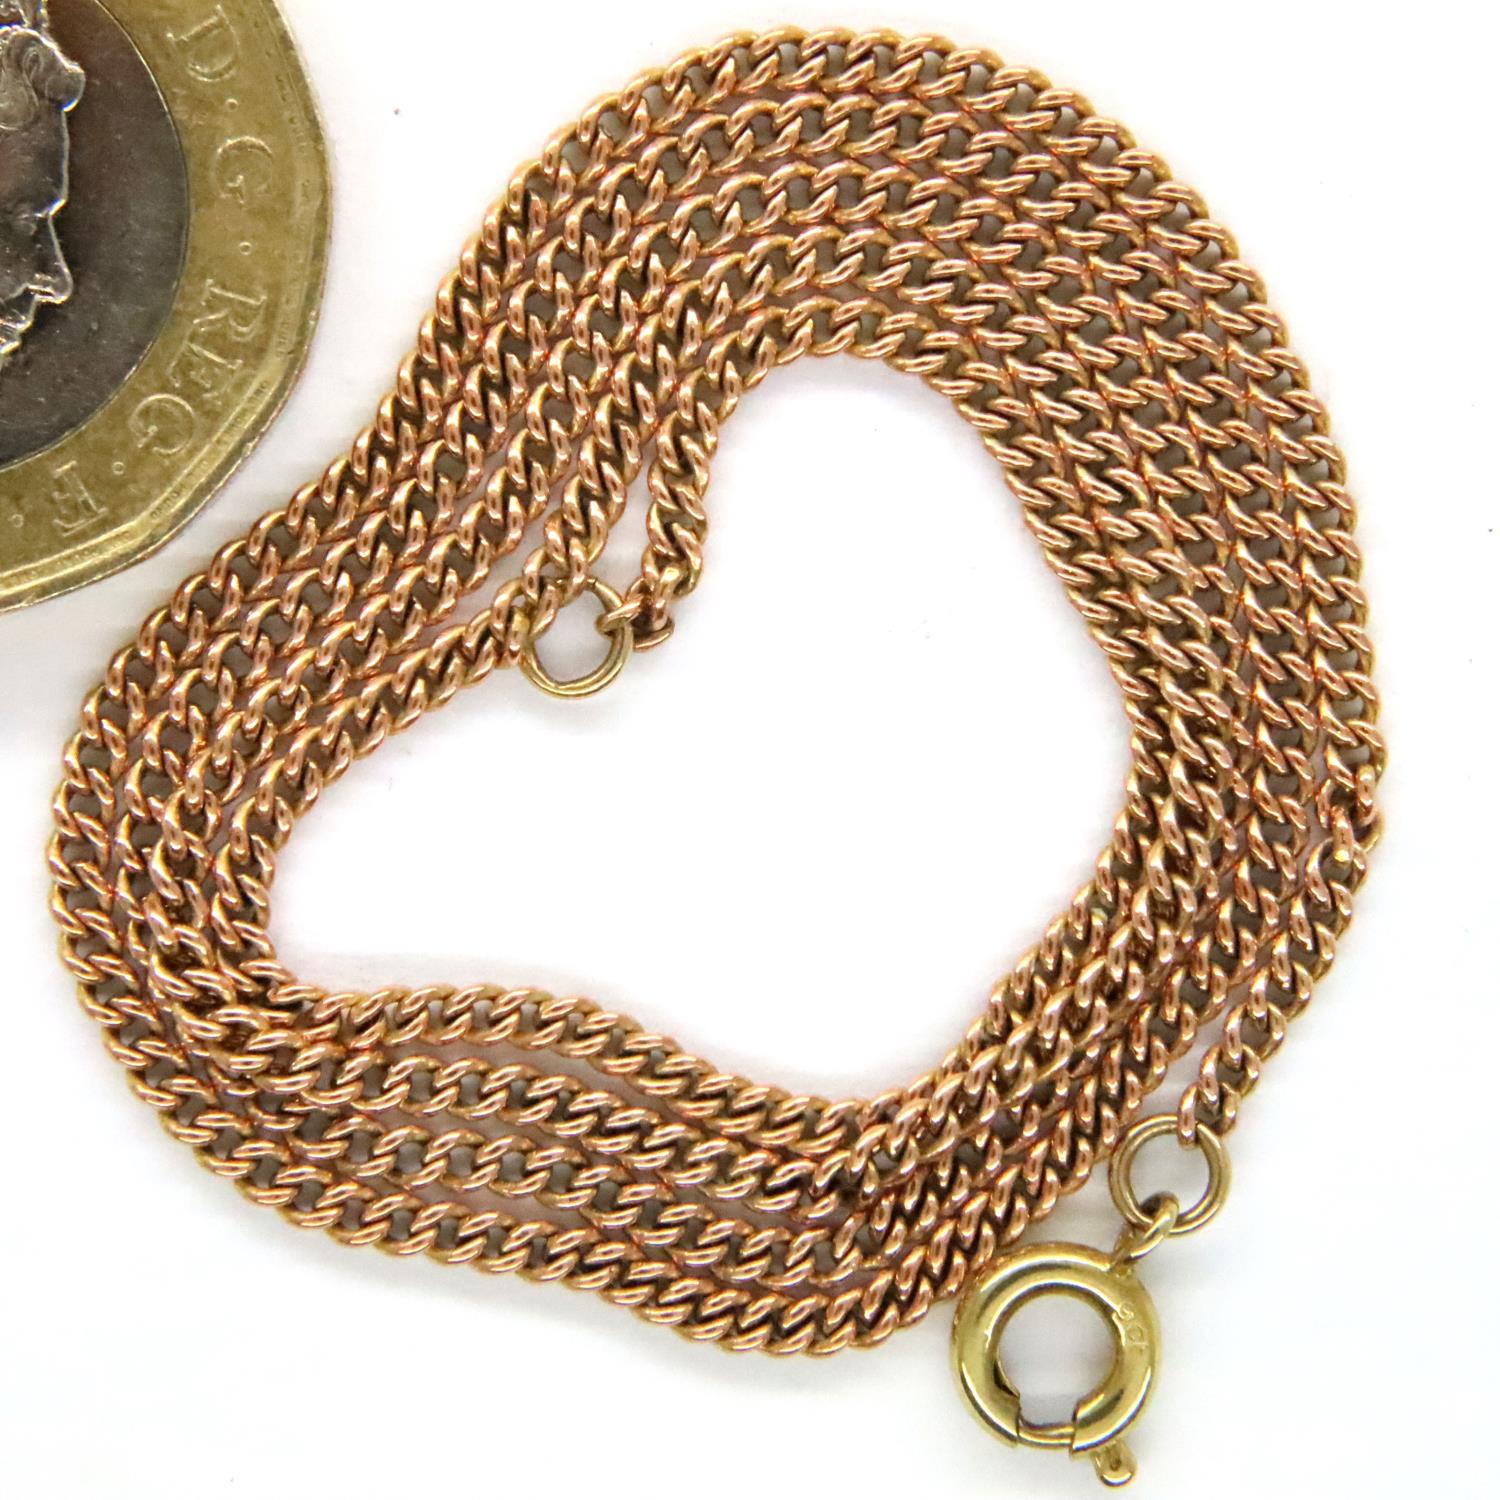 9ct rose gold neck chain, L: 45 cm, 4.0g. P&P Group 1 (£14+VAT for the first lot and £1+VAT for